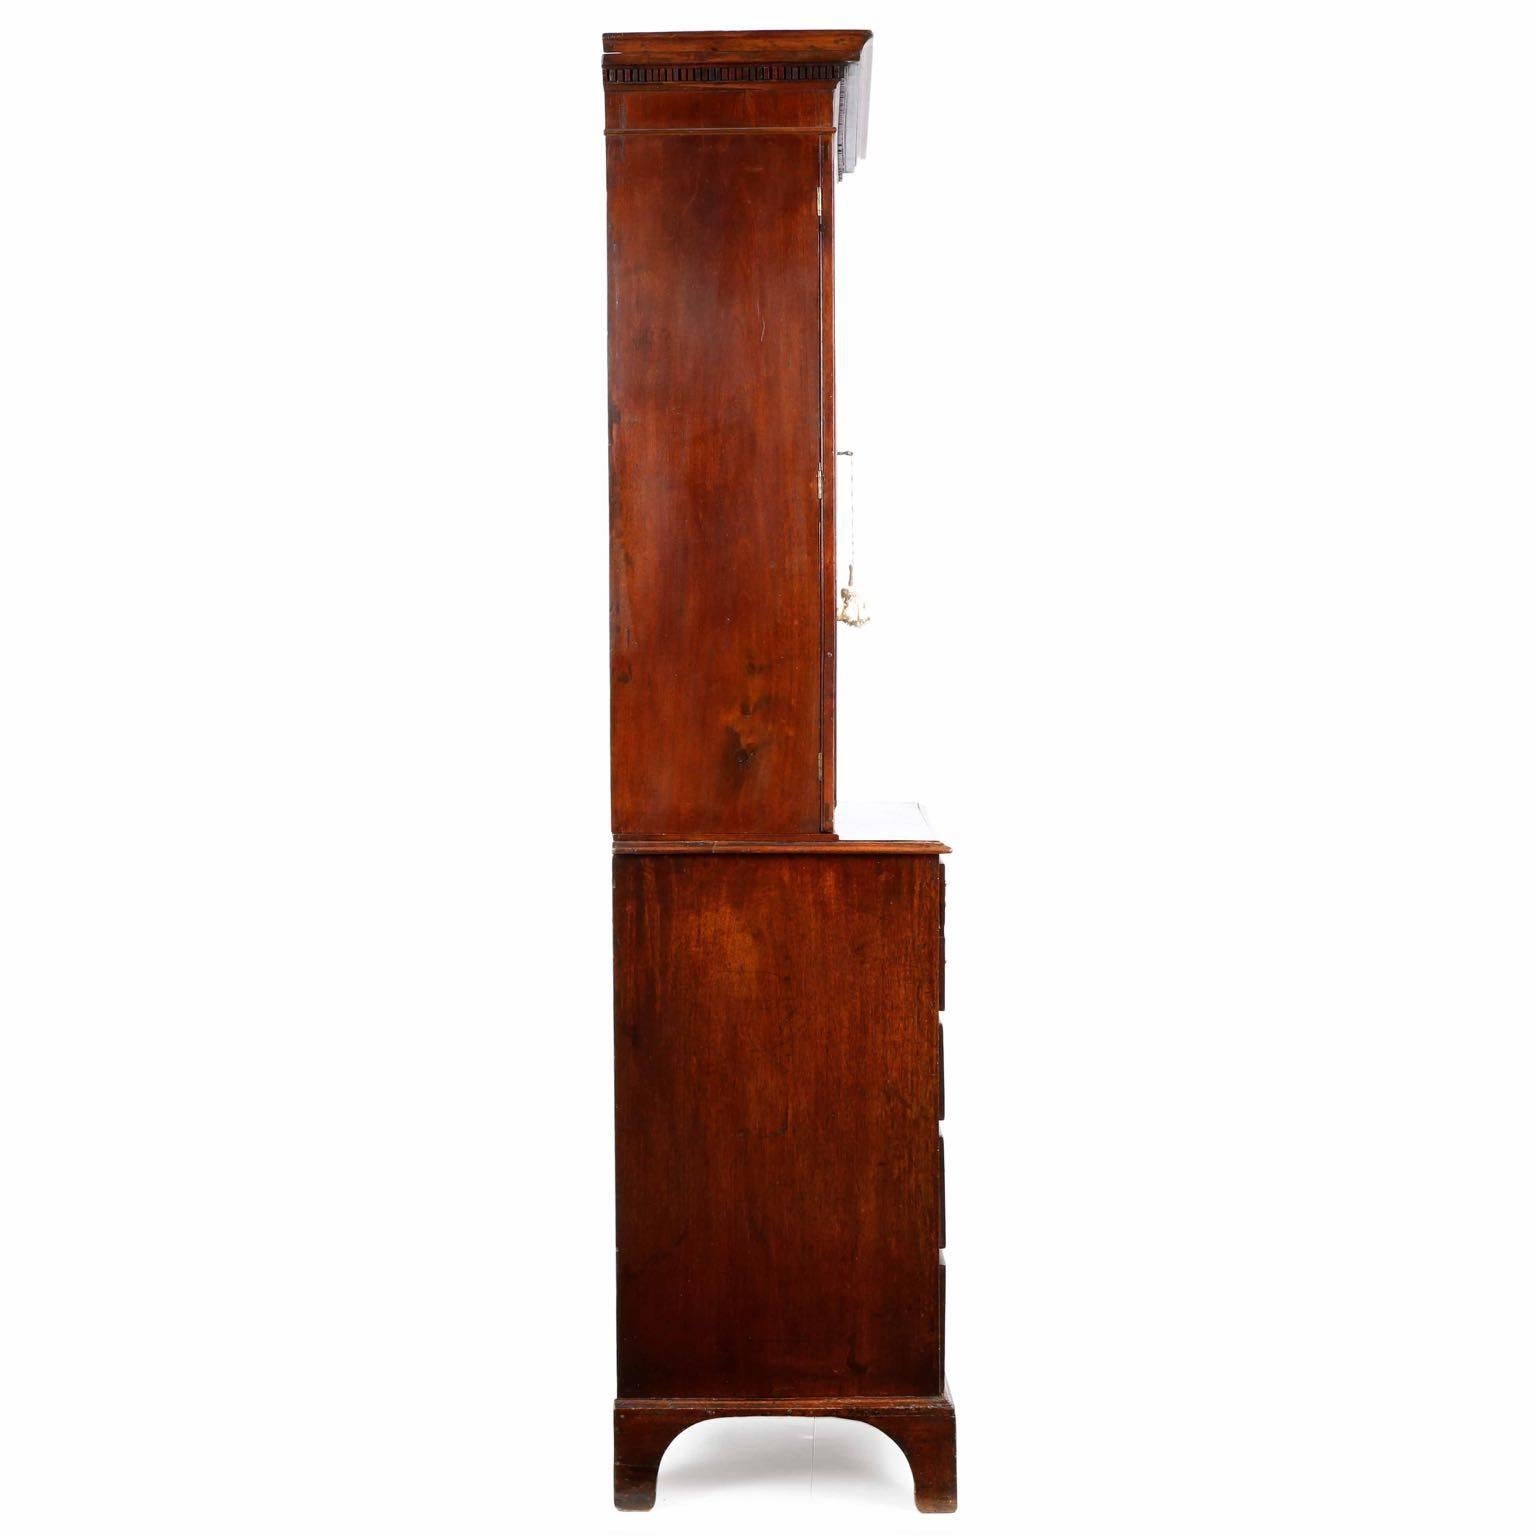 Of perfect size and proportions, this English George III Secretary Desk is commanding in presence while restrained in dimension.  Finely crafted in every way, the piece exhibits bold toothed dentil molding beneath the projecting crown molding over